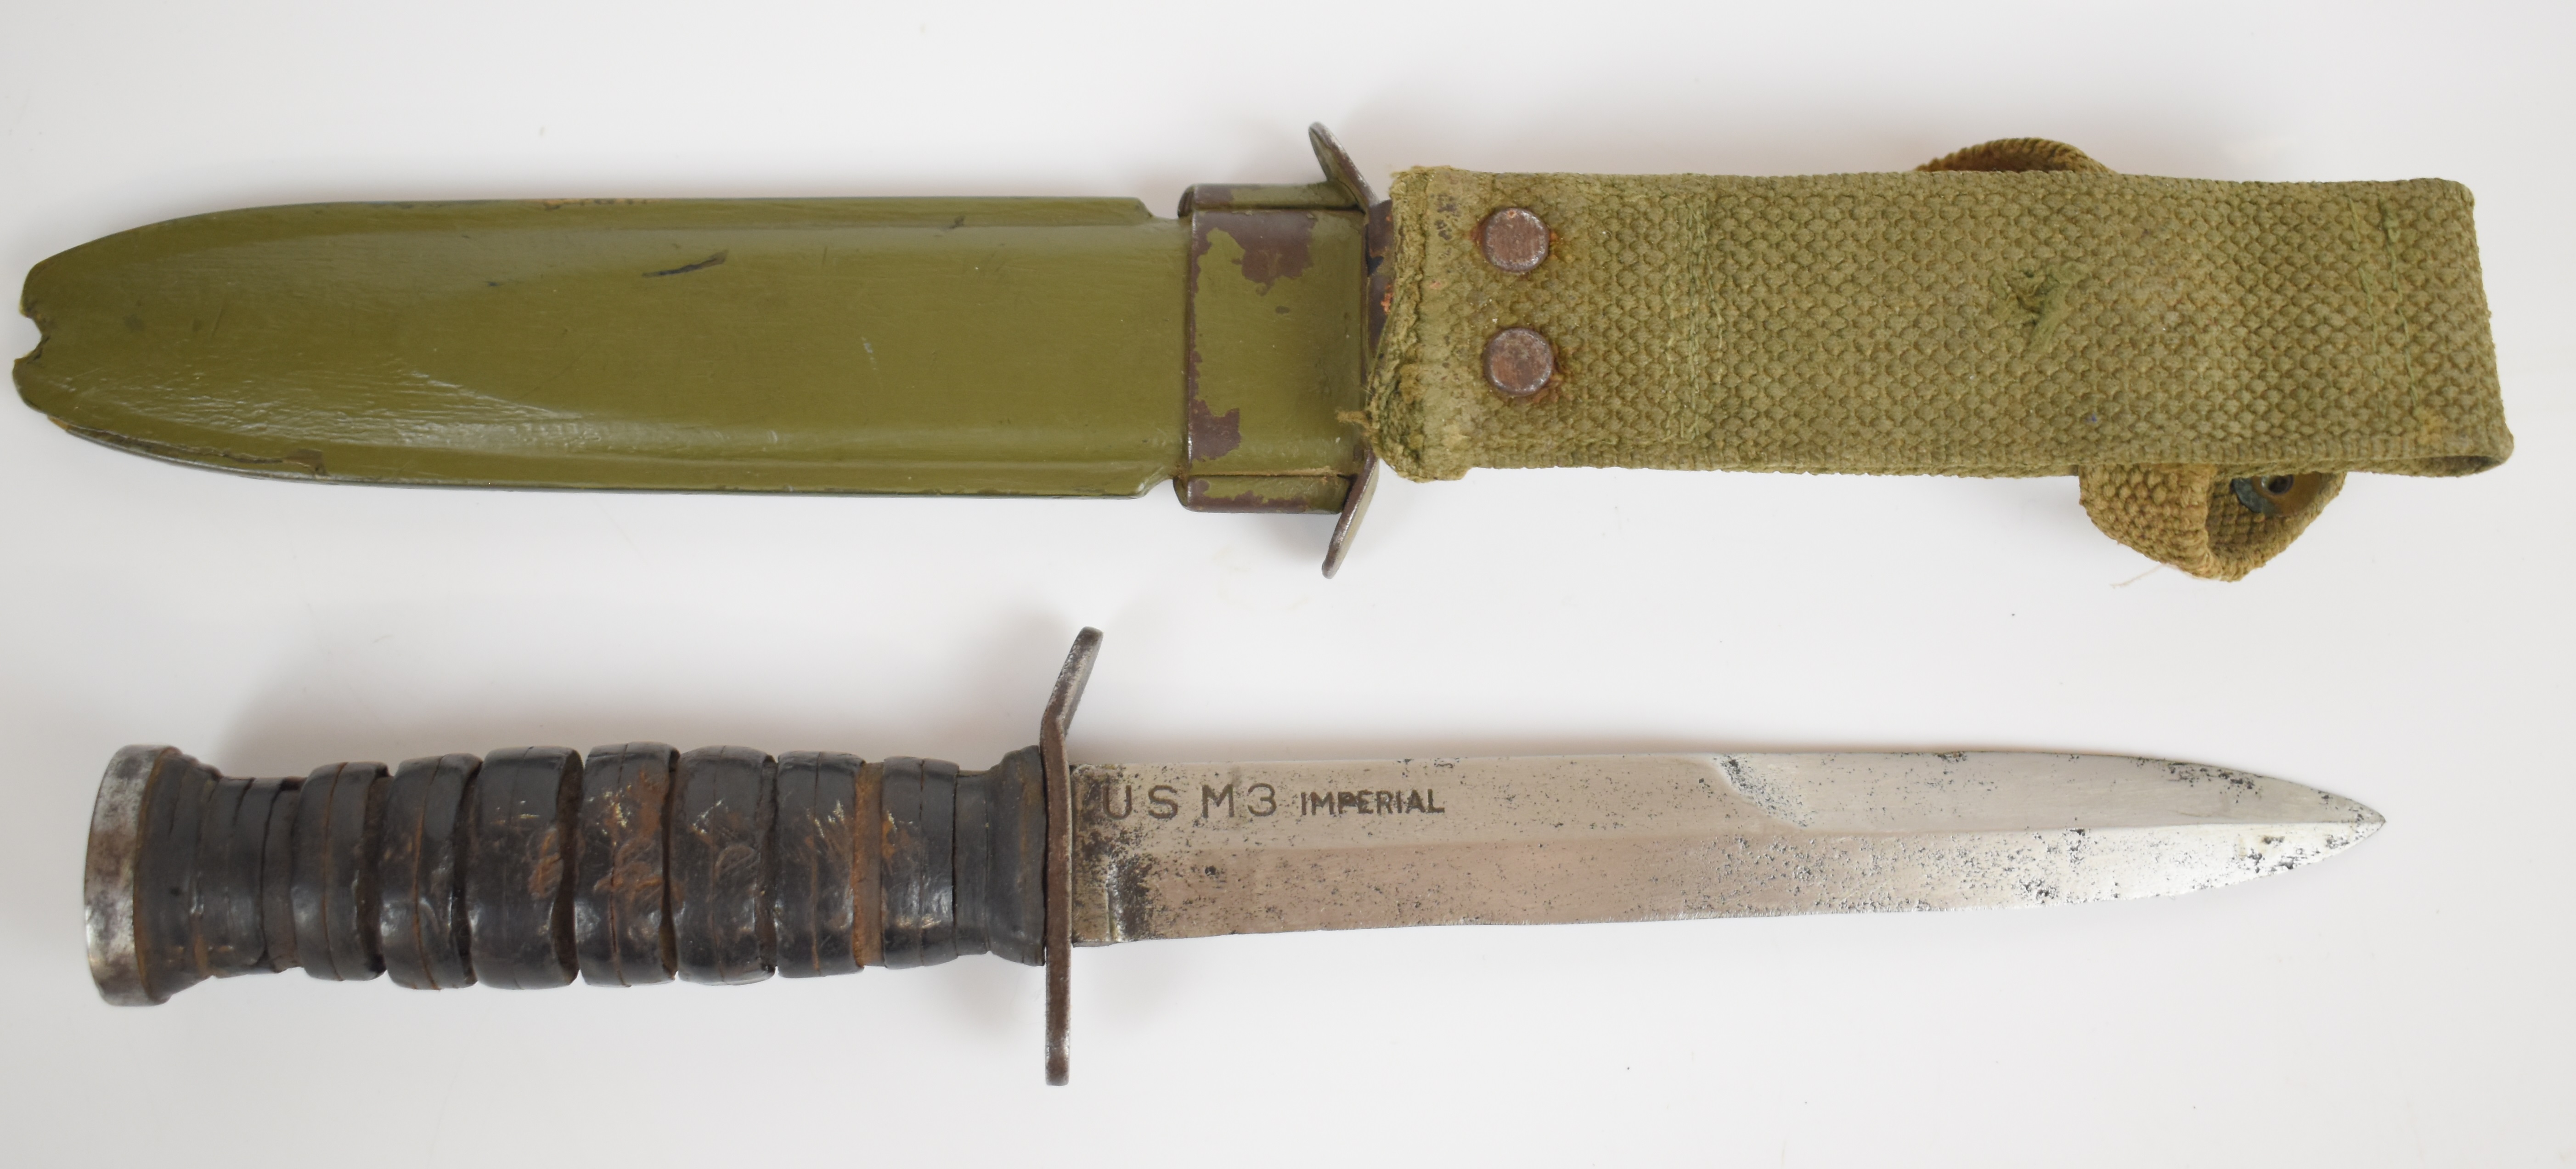 American WW2 fighting knife with leather grip, USM3 Imperial marked to double edged 17cm blade, - Image 2 of 3